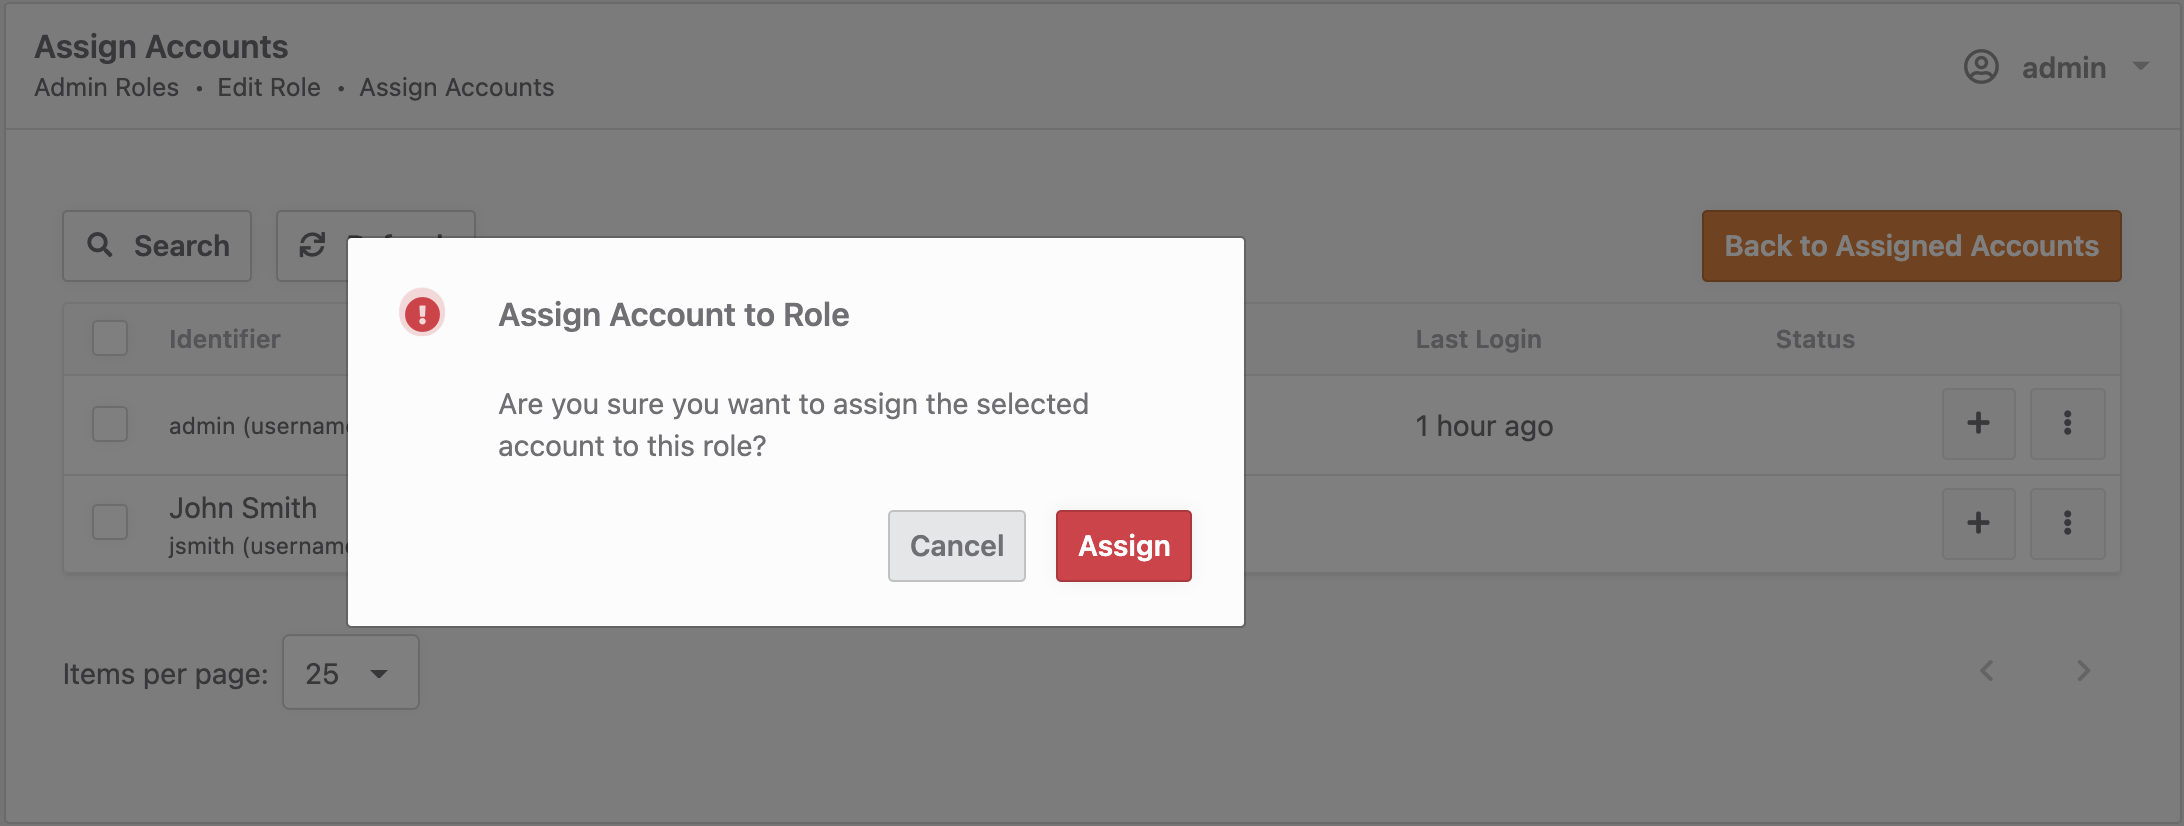 Role assignment confirmation window